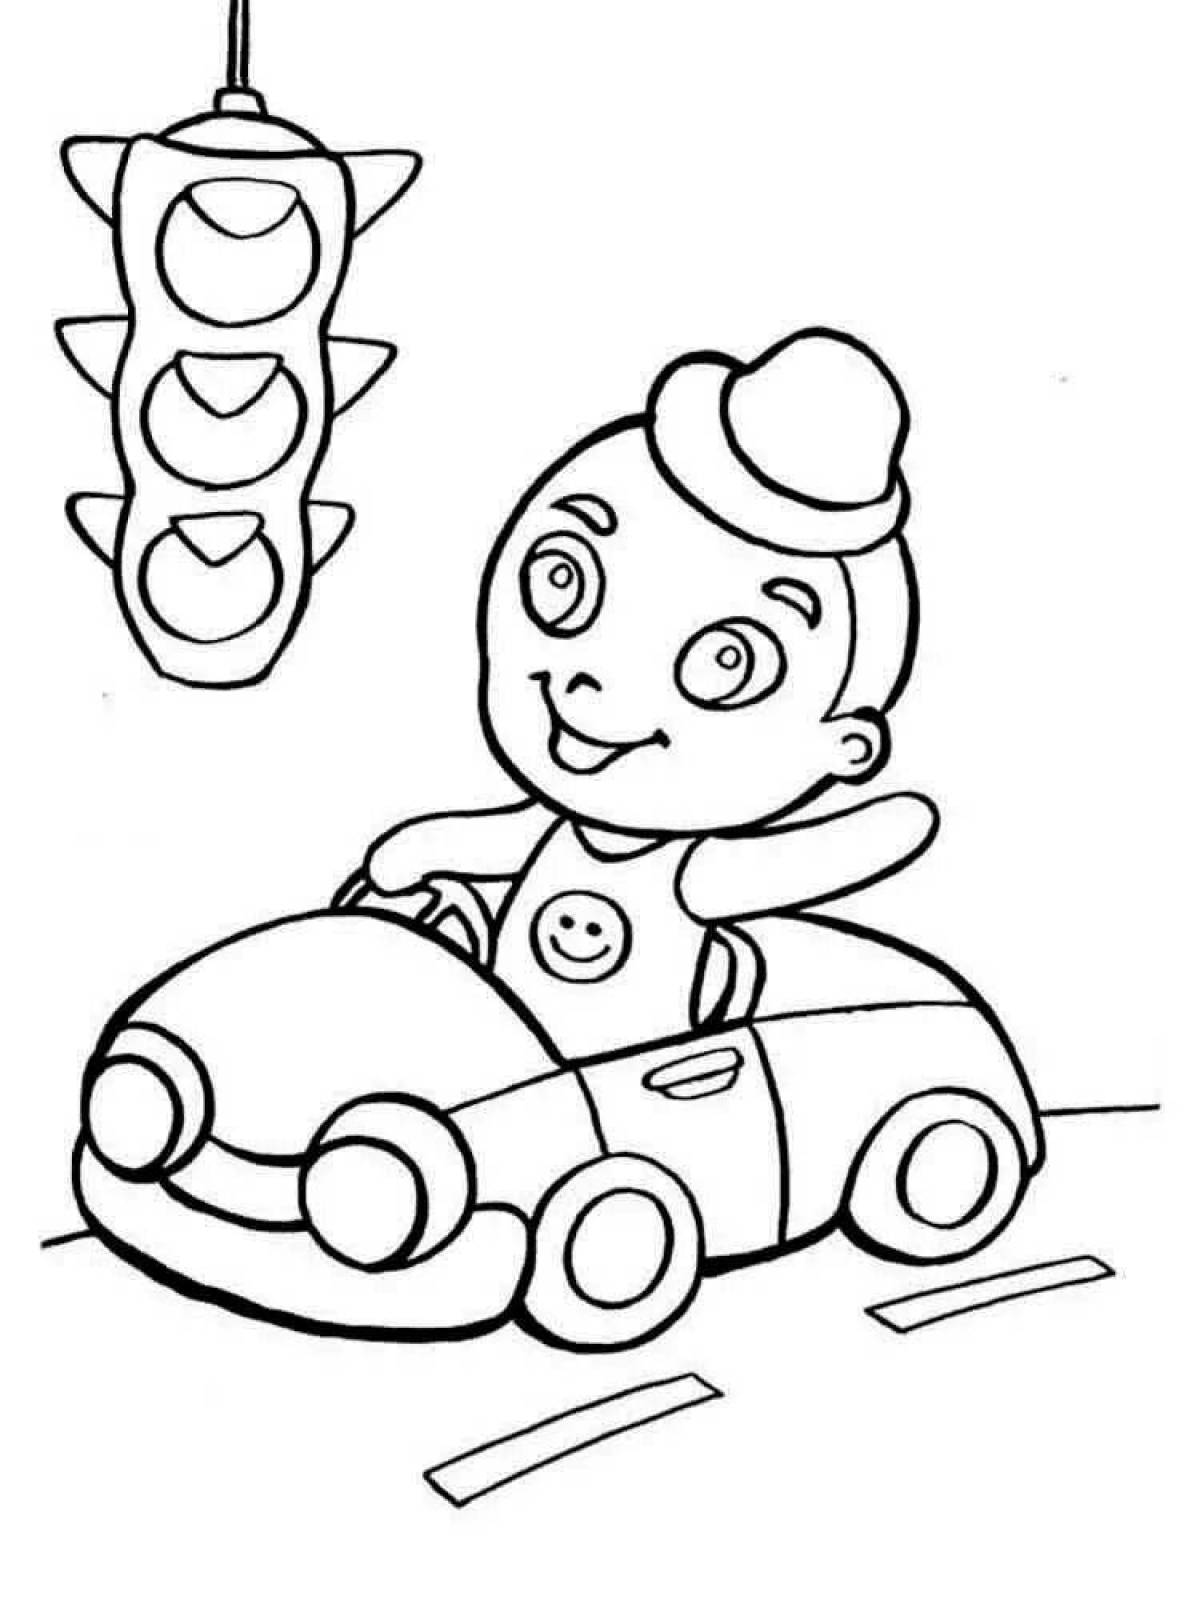 Sparkling traffic light coloring page for 2-3 year olds